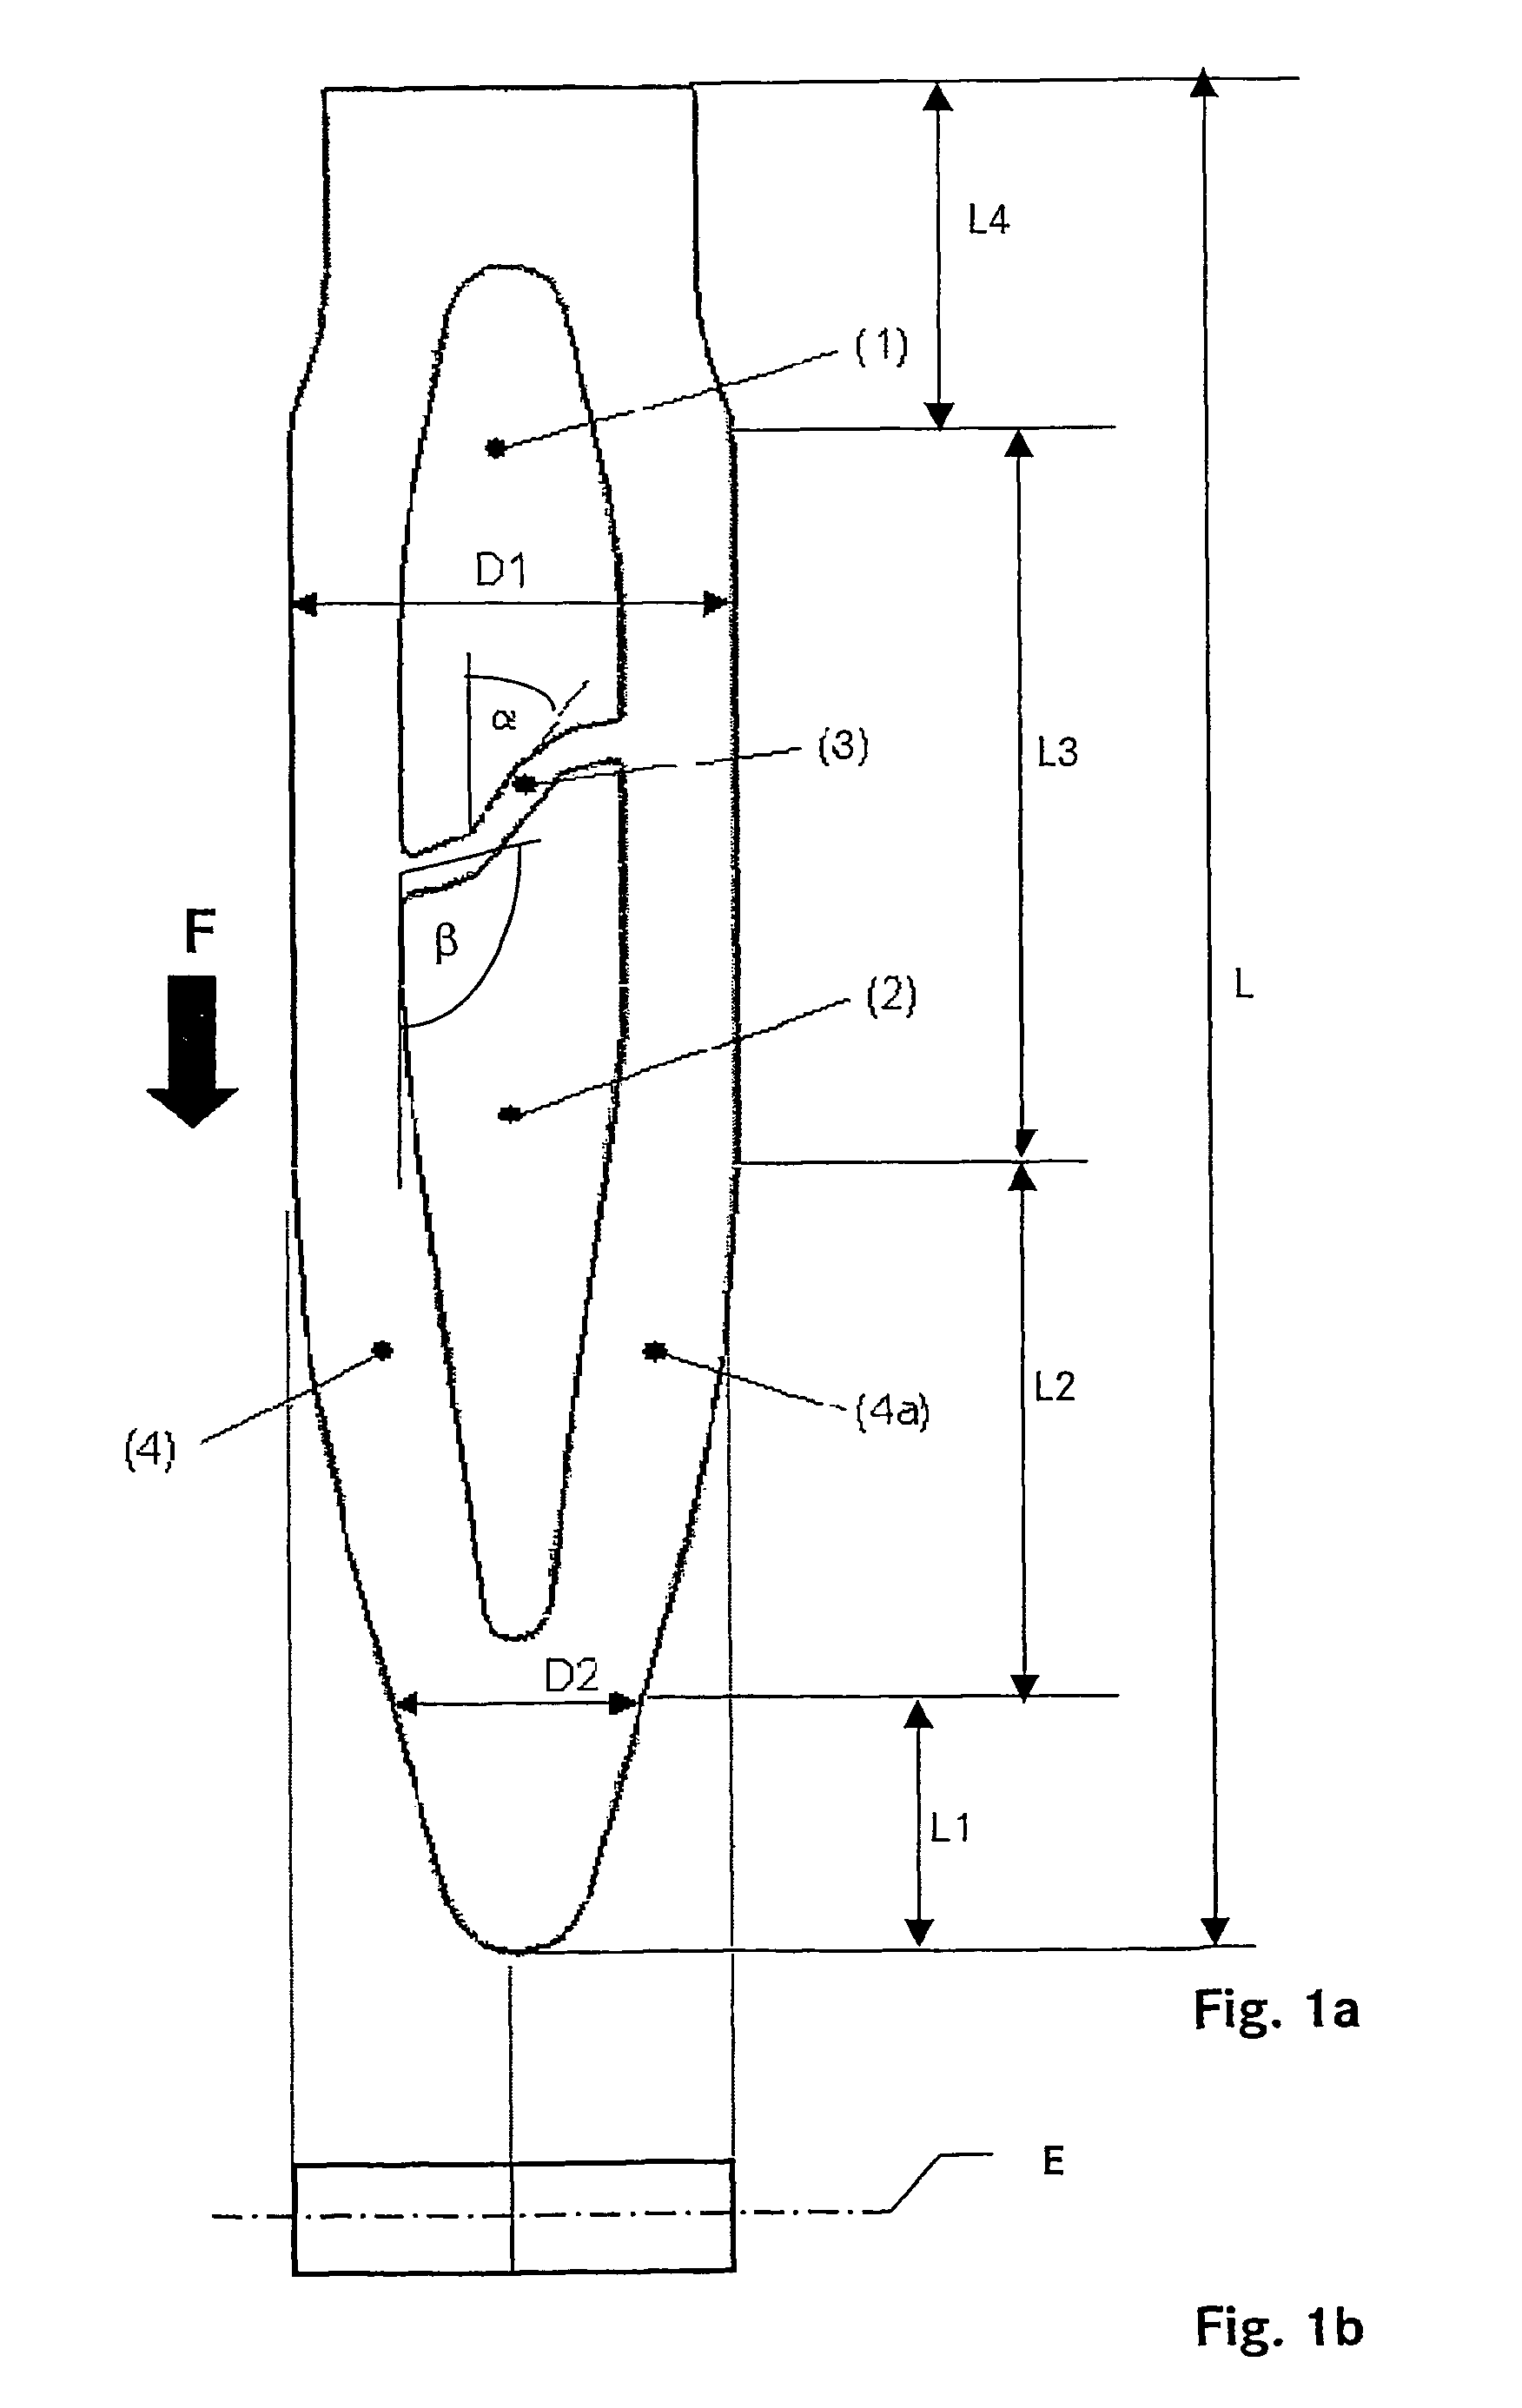 Contact element for press fitting into a hole of a printed circuit board